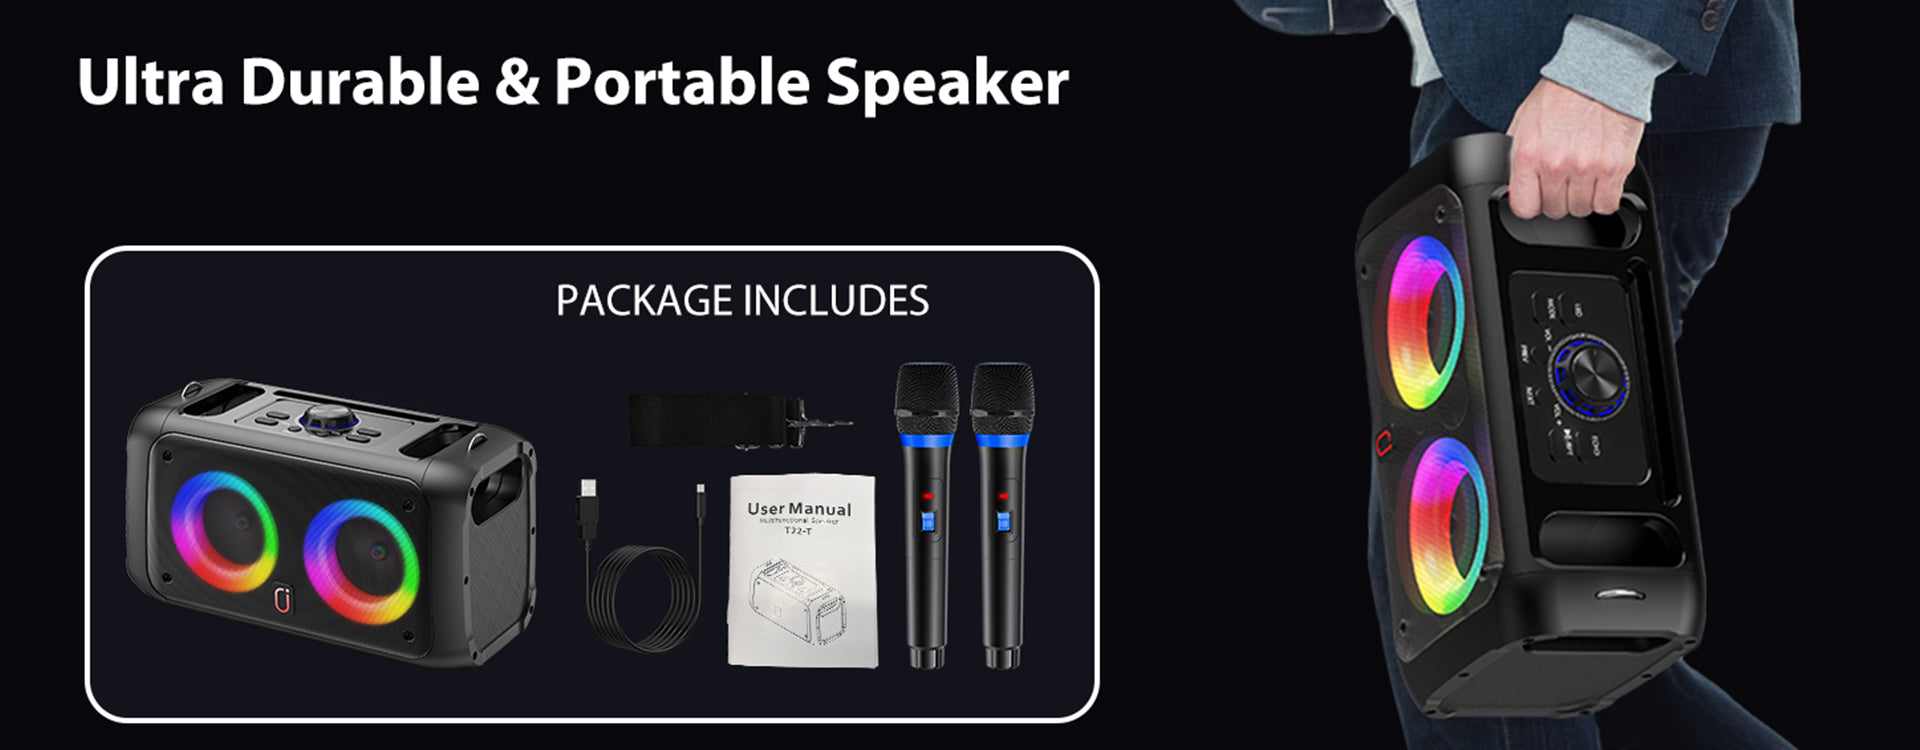 Ultra Durable & Portable Speaker for JYX T20T Portable Karaoke Machine with 2 wireless mics. 